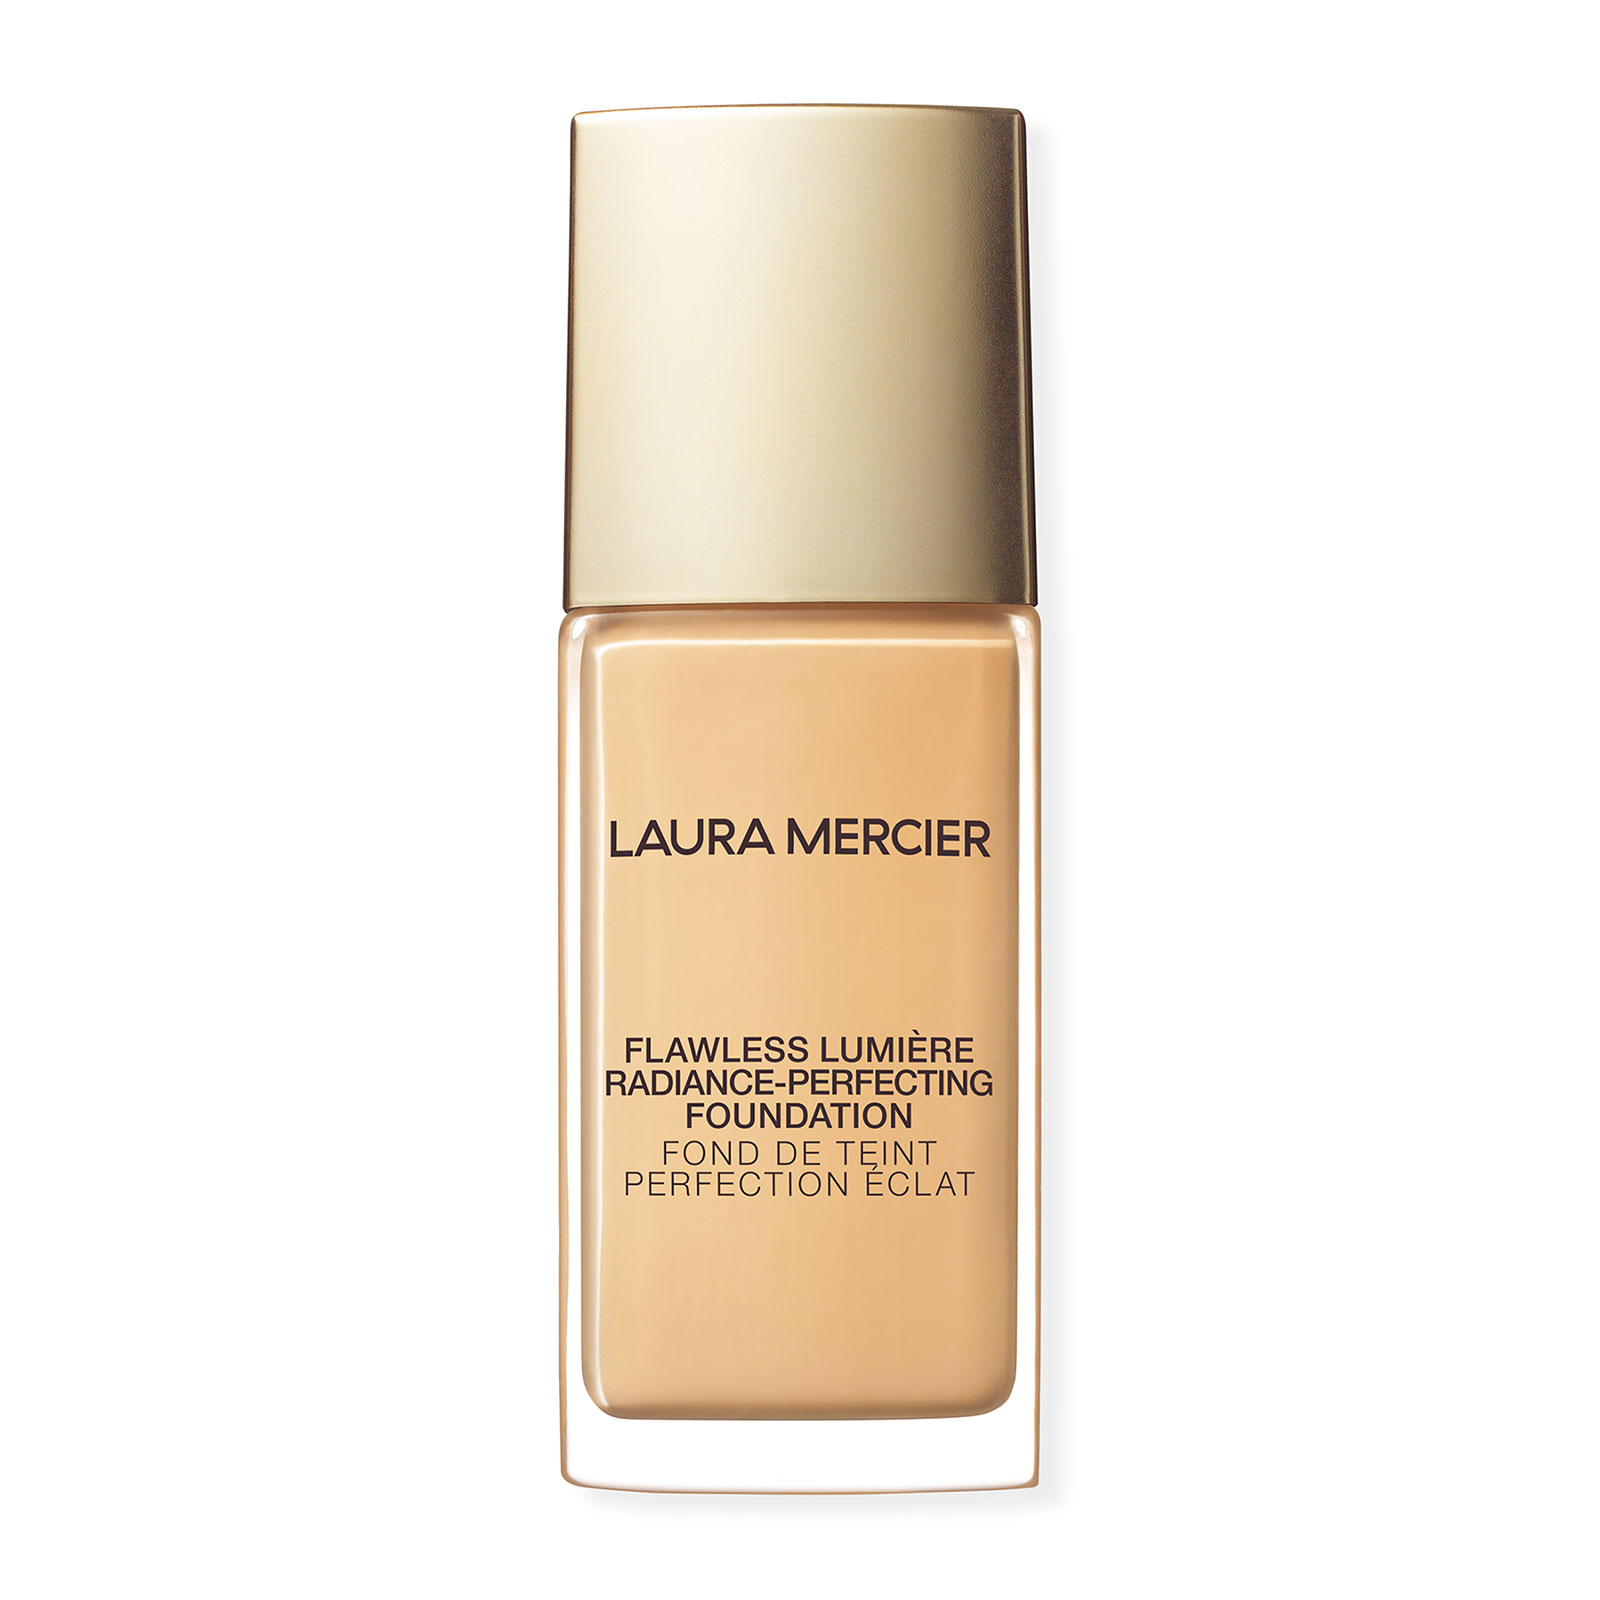 Laura Mercier Flawless Lumiere Radiance-Perfecting Foundation 30Ml 1C1 Shell